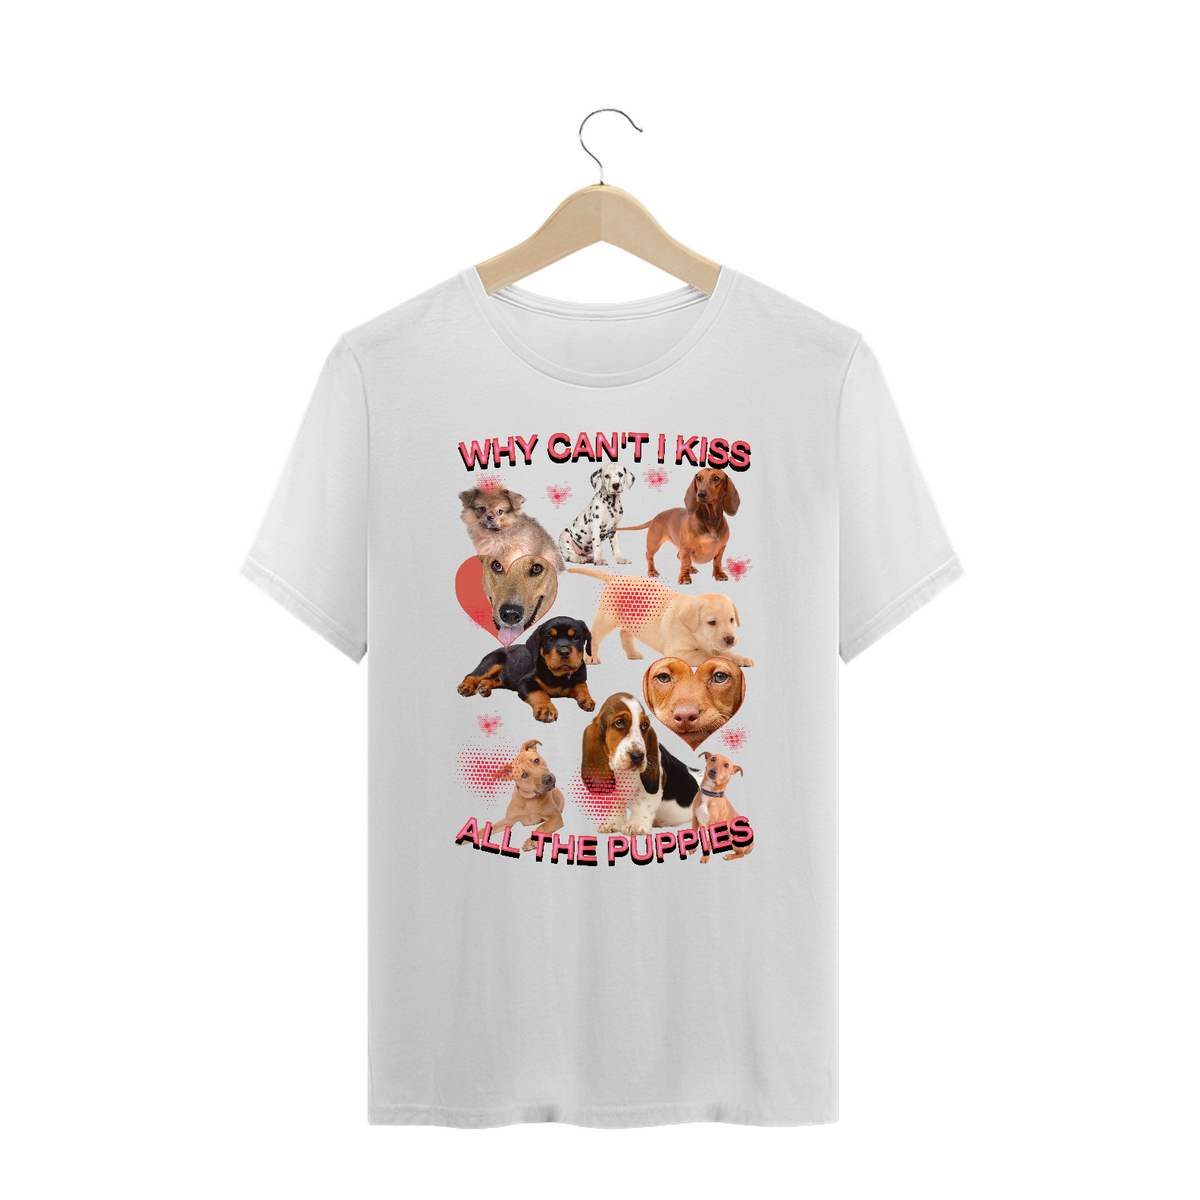 Nome do produto: Camiseta Plus Size \'WHY CAN\'T I KISS ALL THE PUPPIES\'